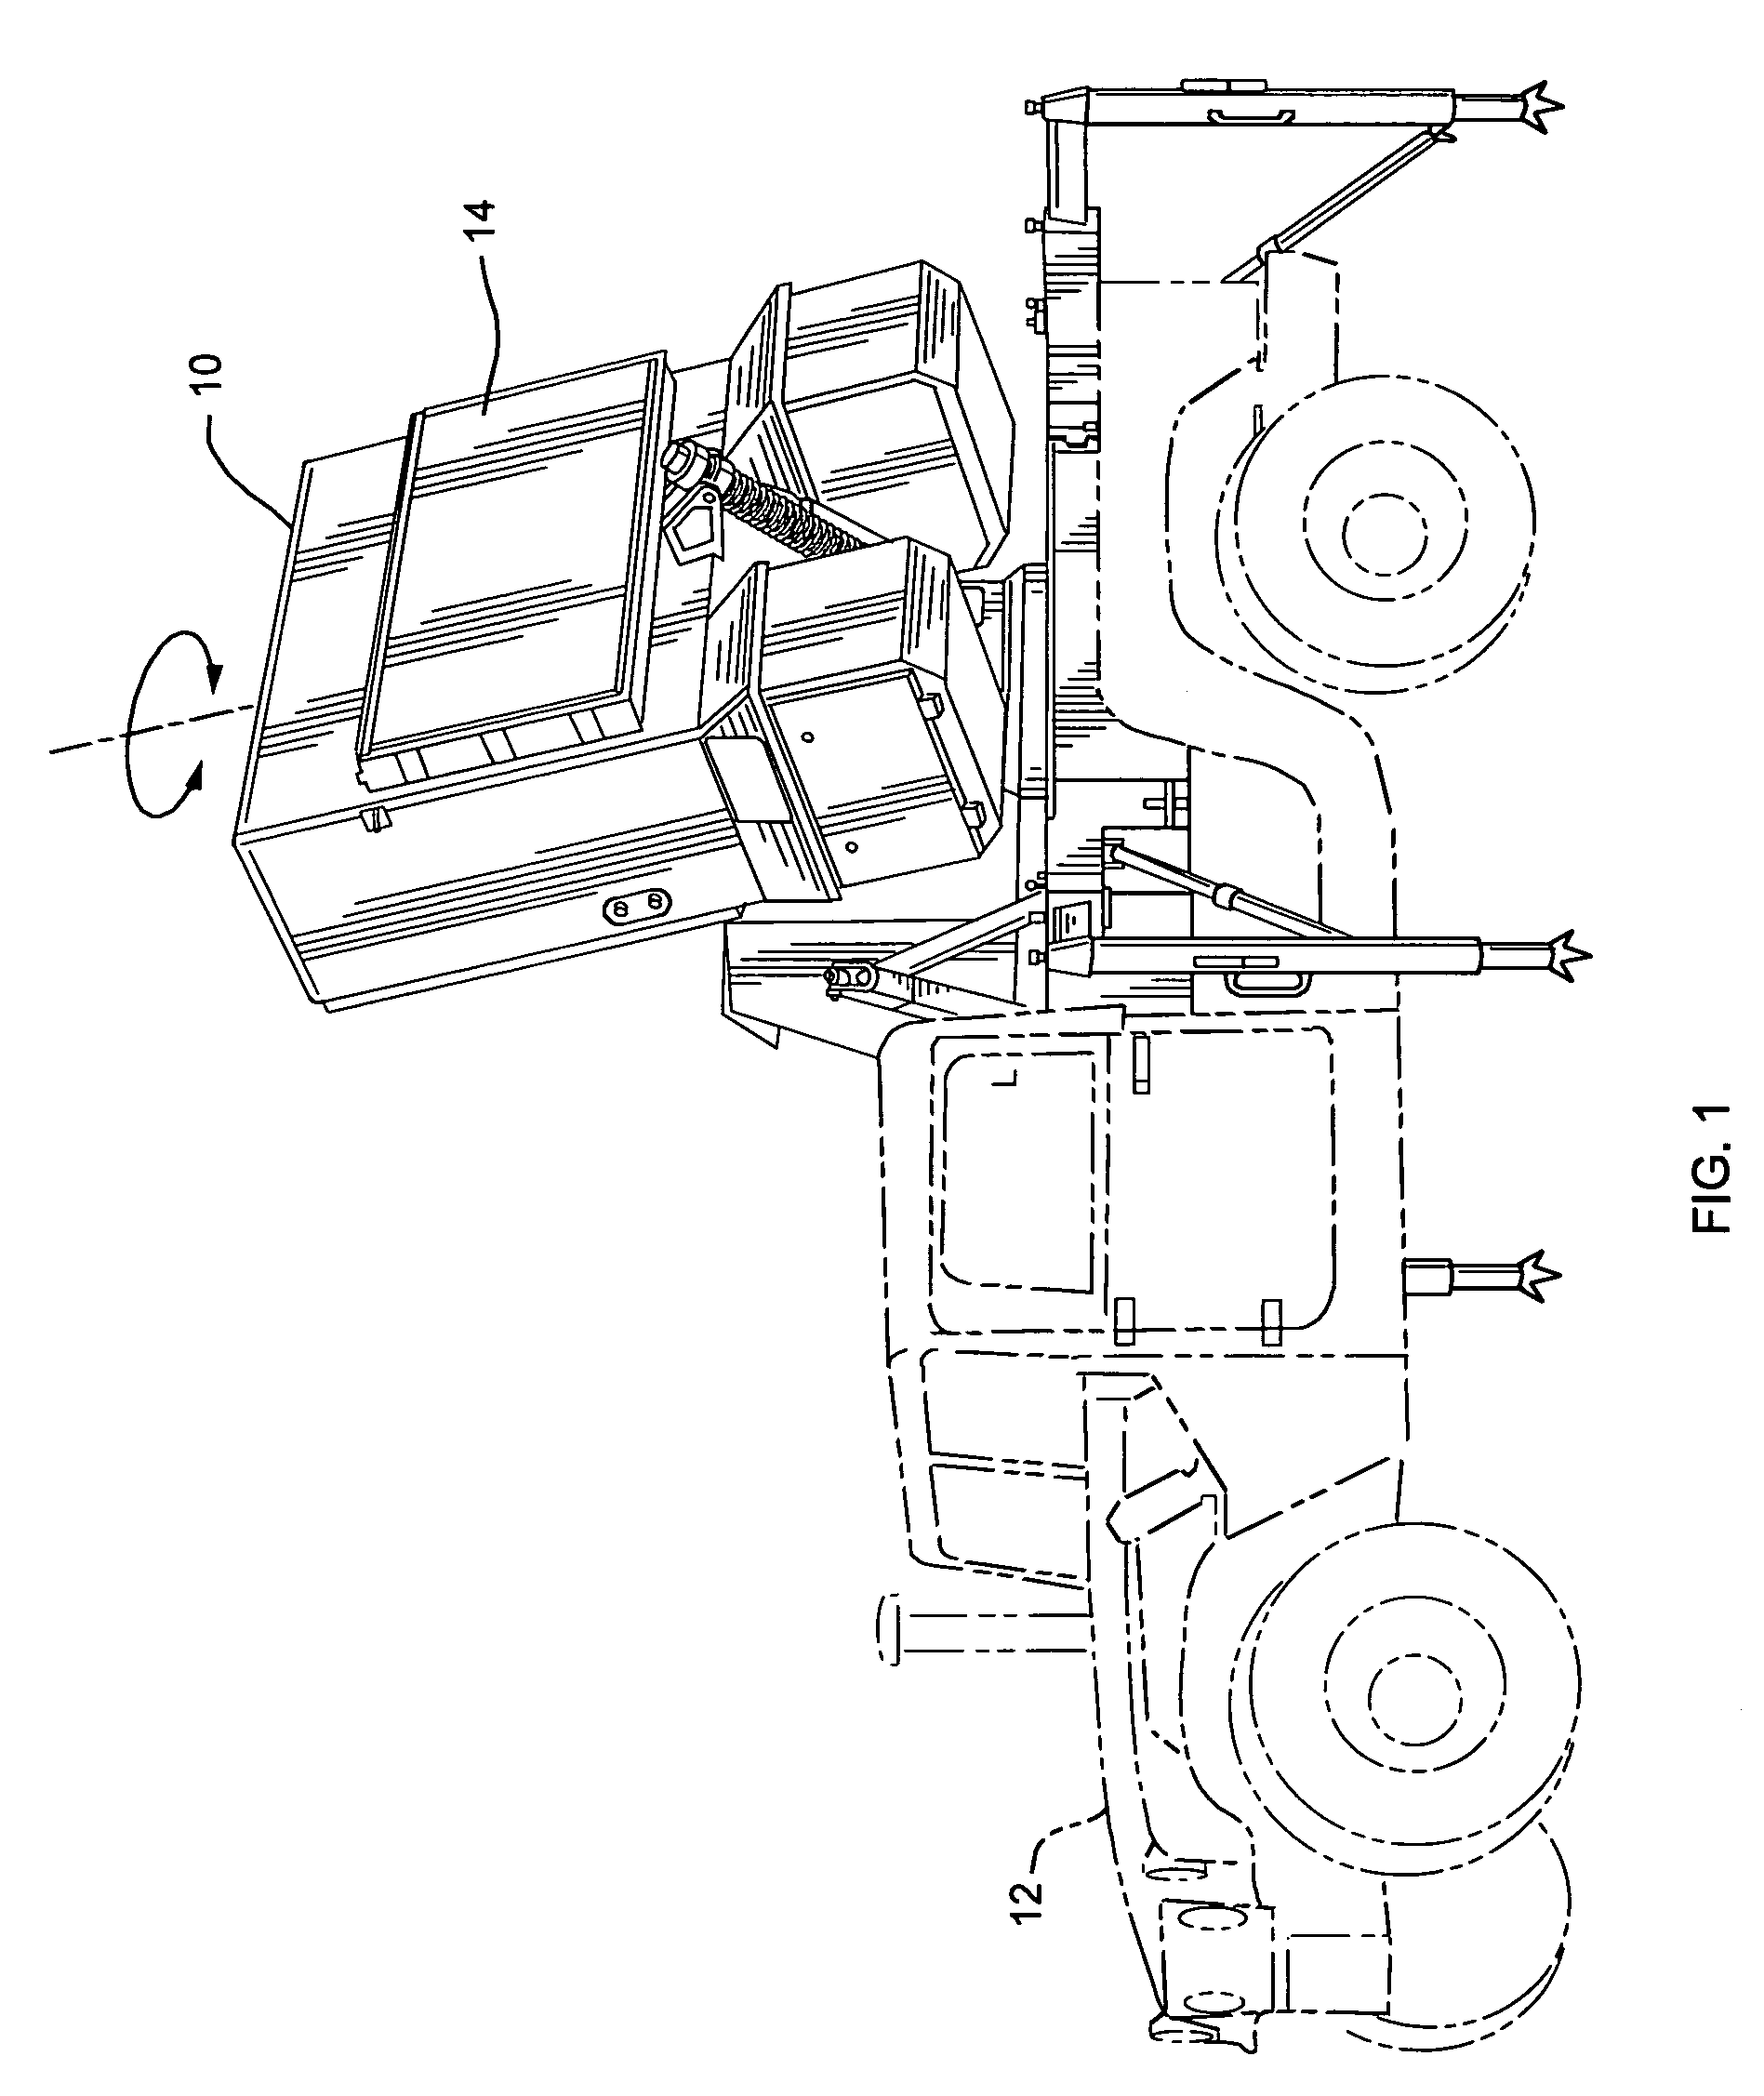 Method of generating accurate estimates of azimuth and elevation angles of a target for a phased-phased array rotating radar